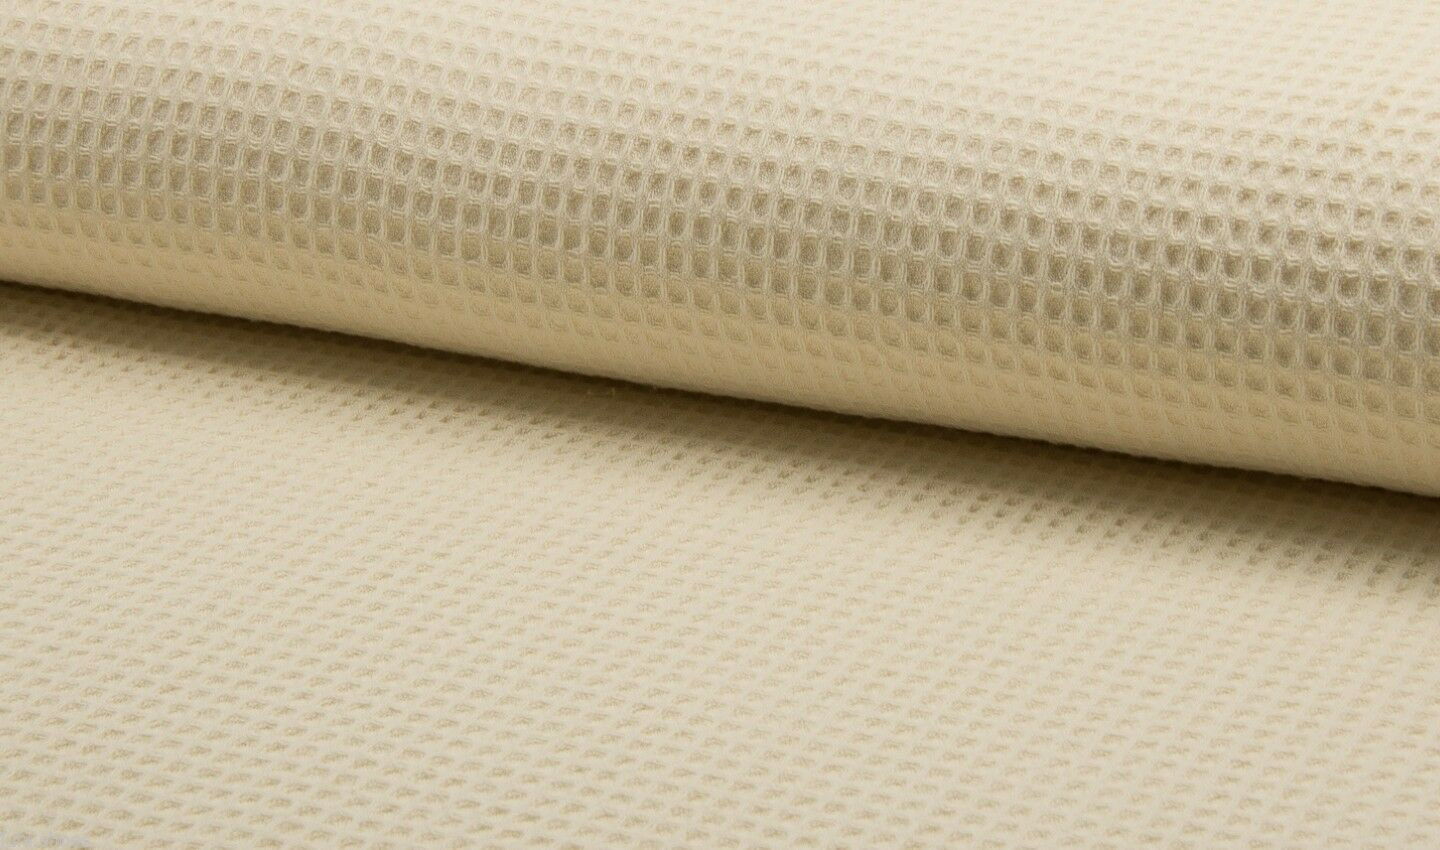  HomeBuy Cotton Waffle Pique Honeycombe Fabric Material - 150Cm  Wide (White)